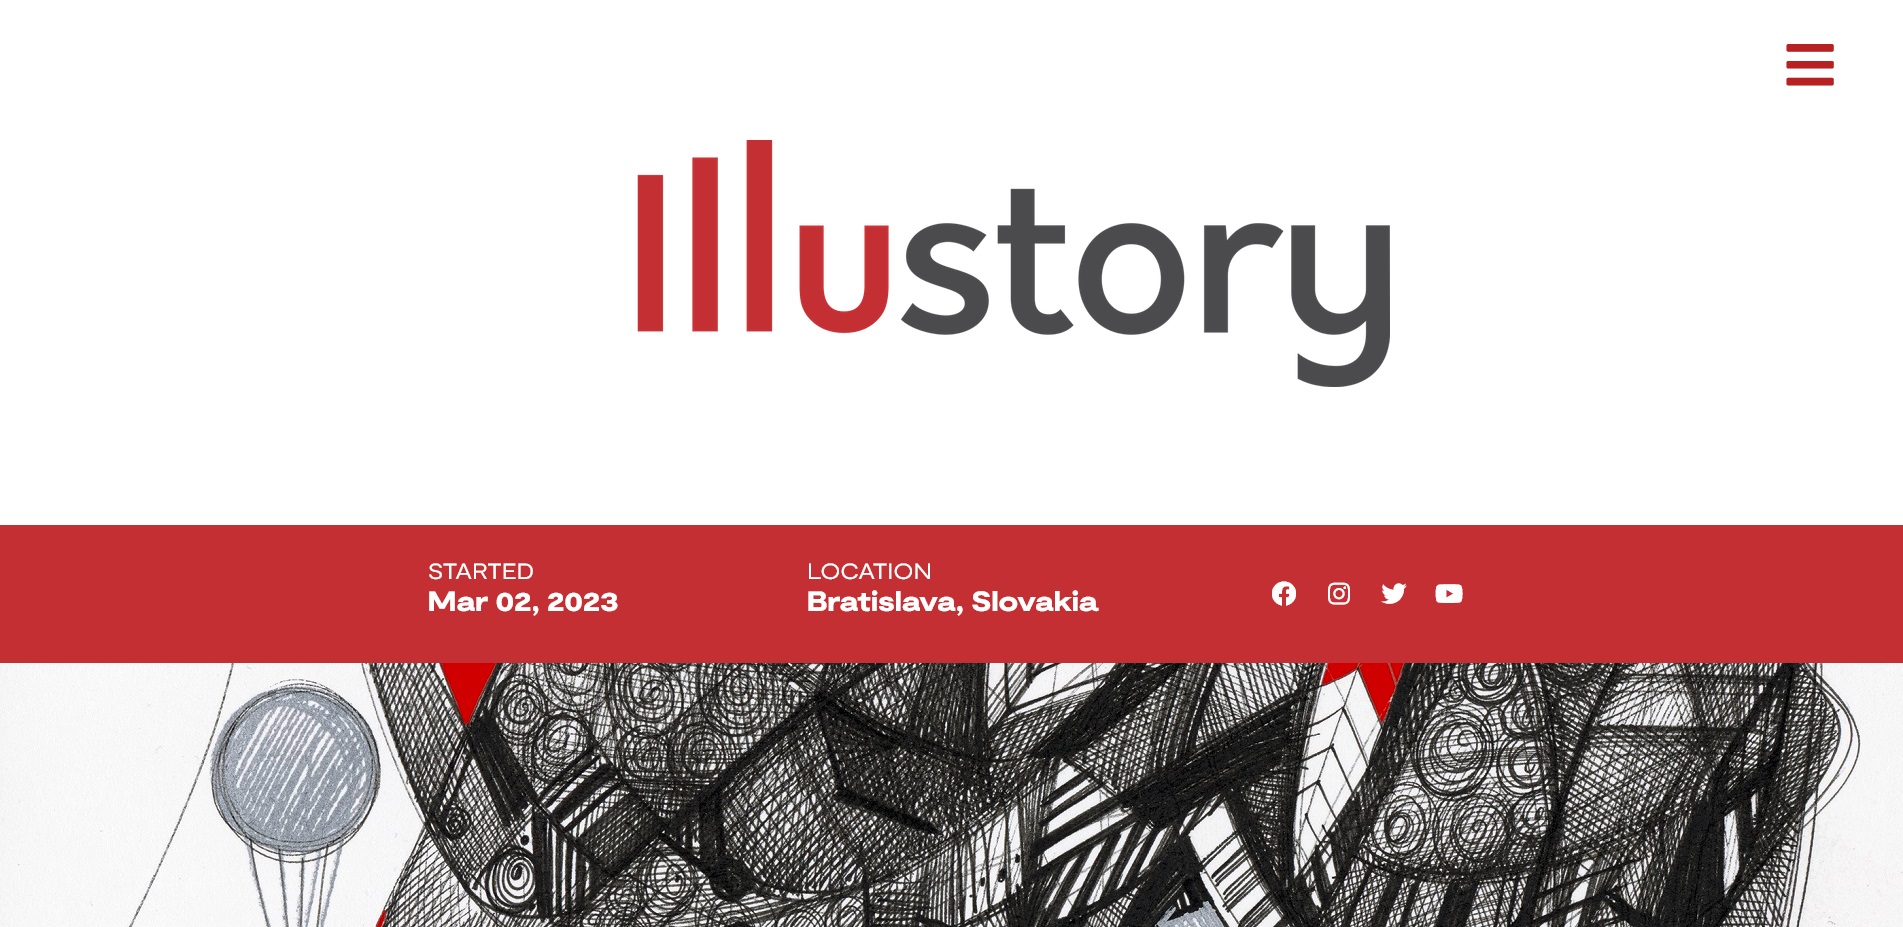 Illustory – Art for the people